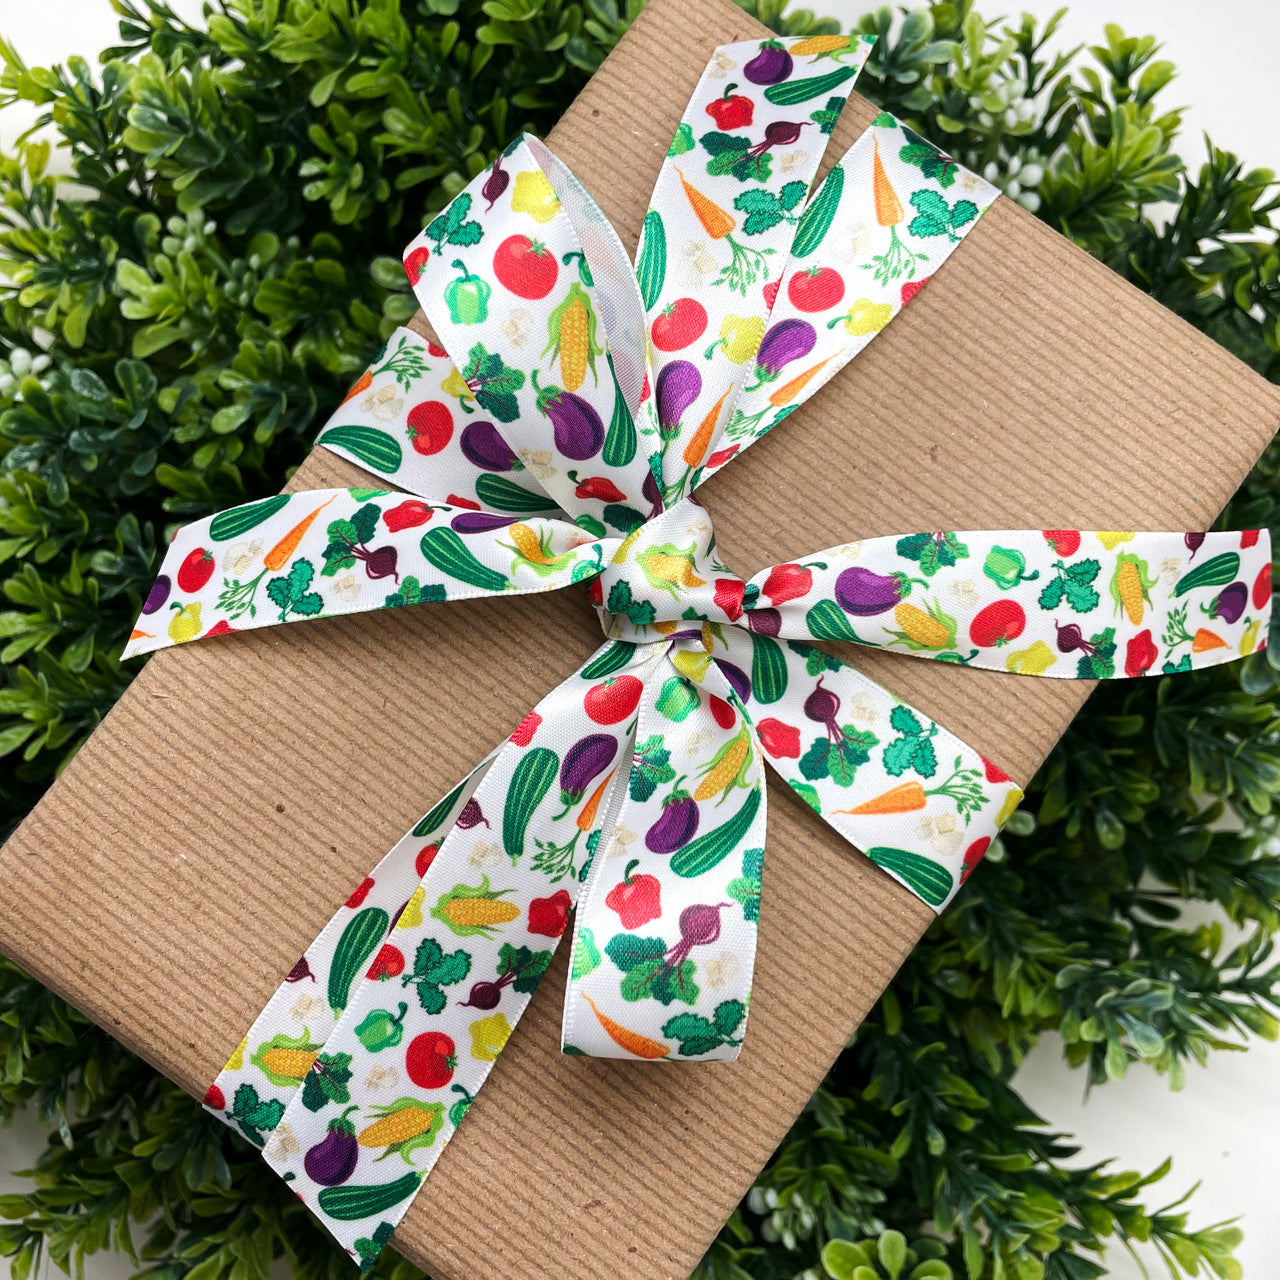 Our 7/8" veggies ribbon makes for a beautiful brown paper package tied with colorful veggies, better than string!